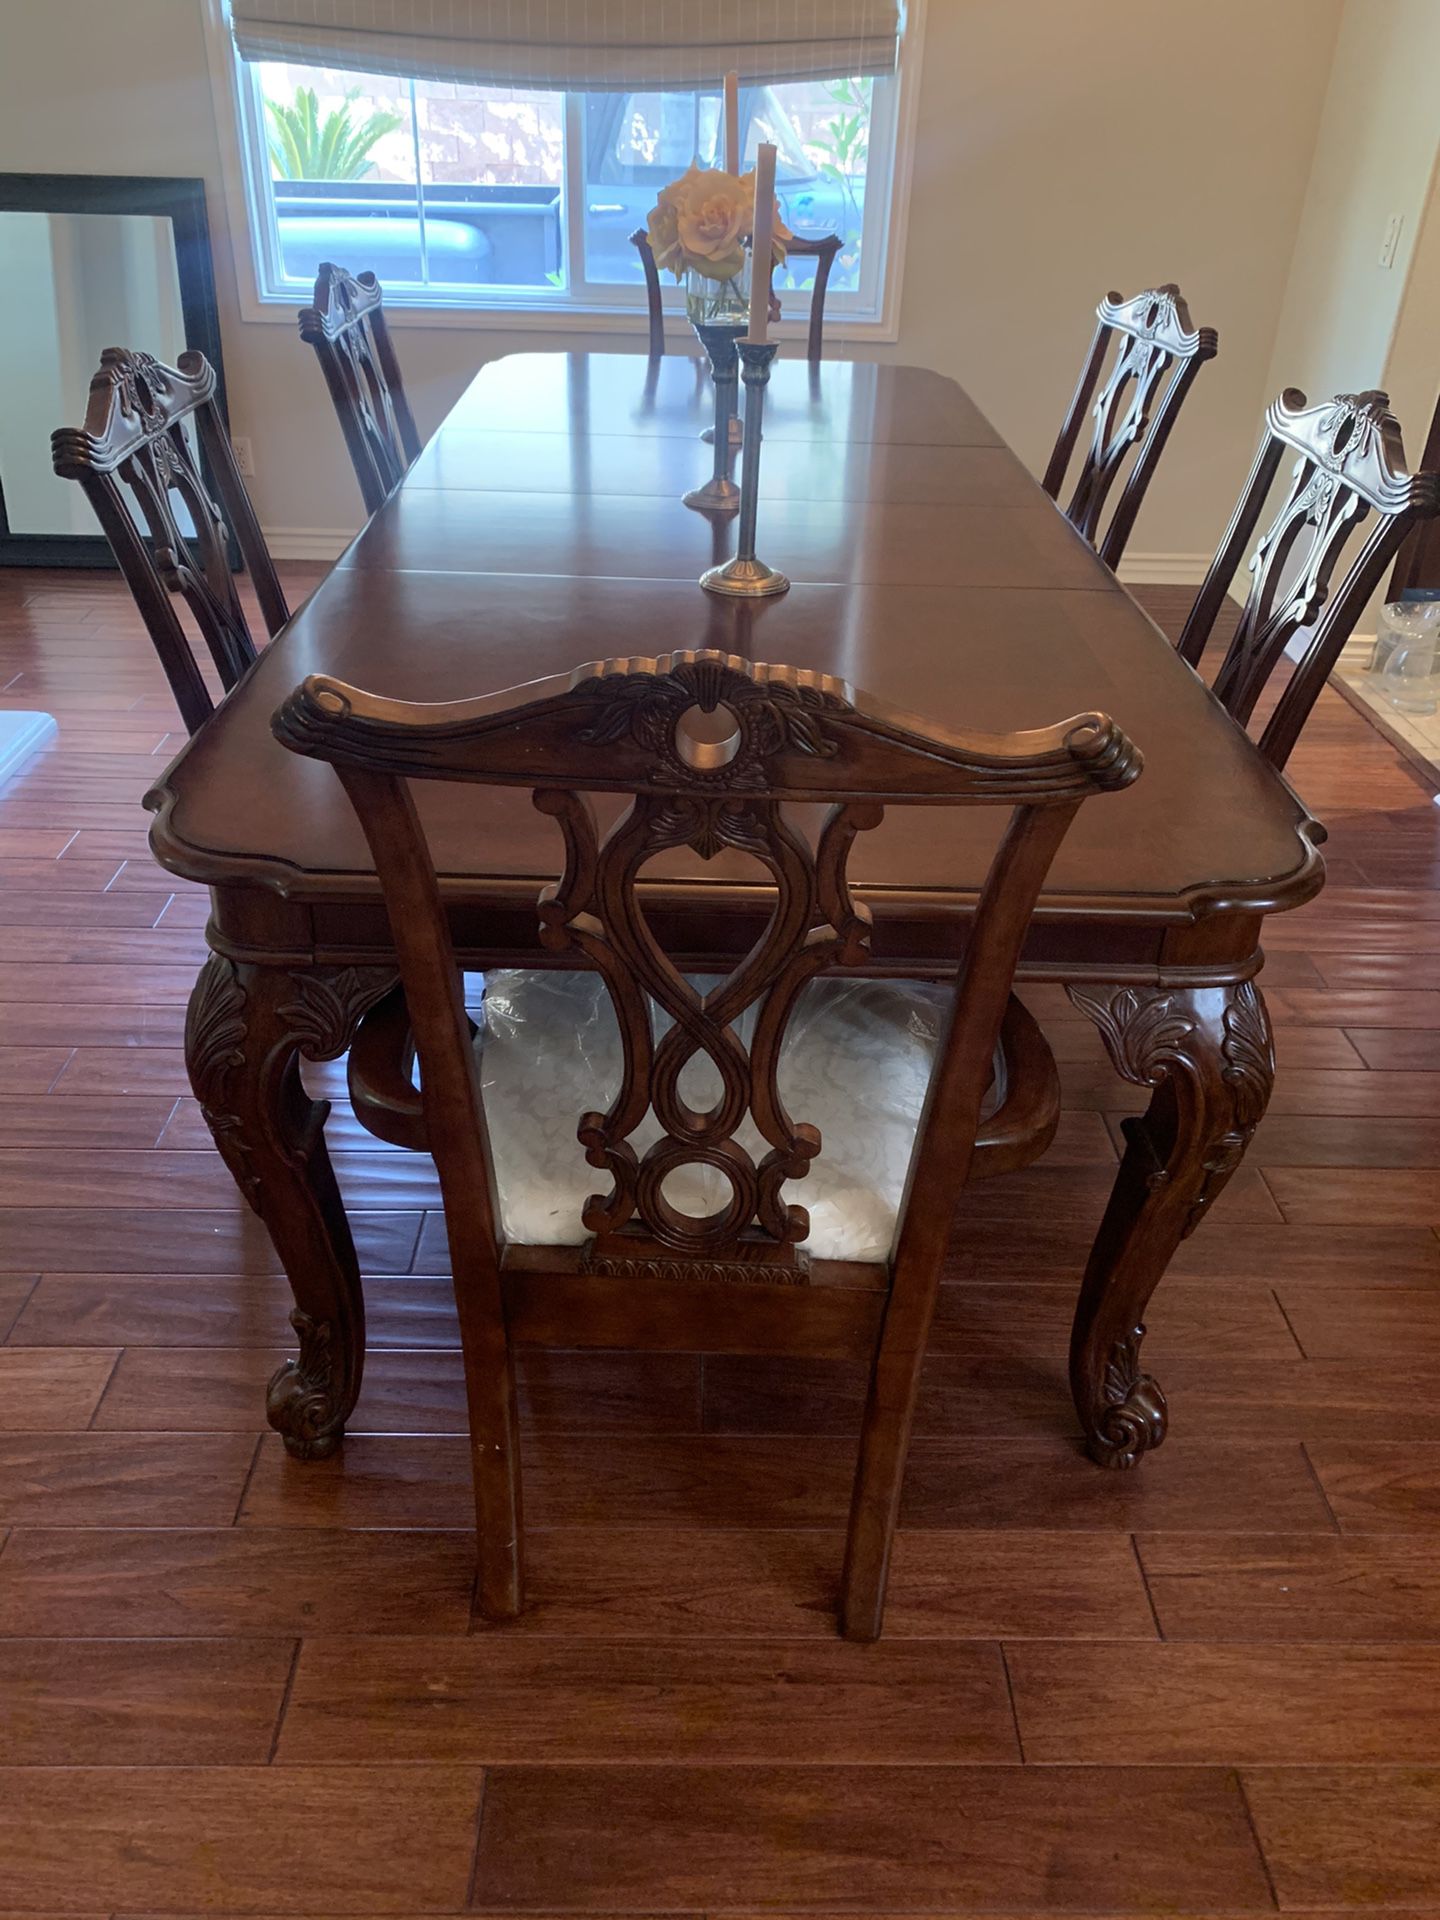 GOOD CONDITION Broyhill formal dining set and accessory tables